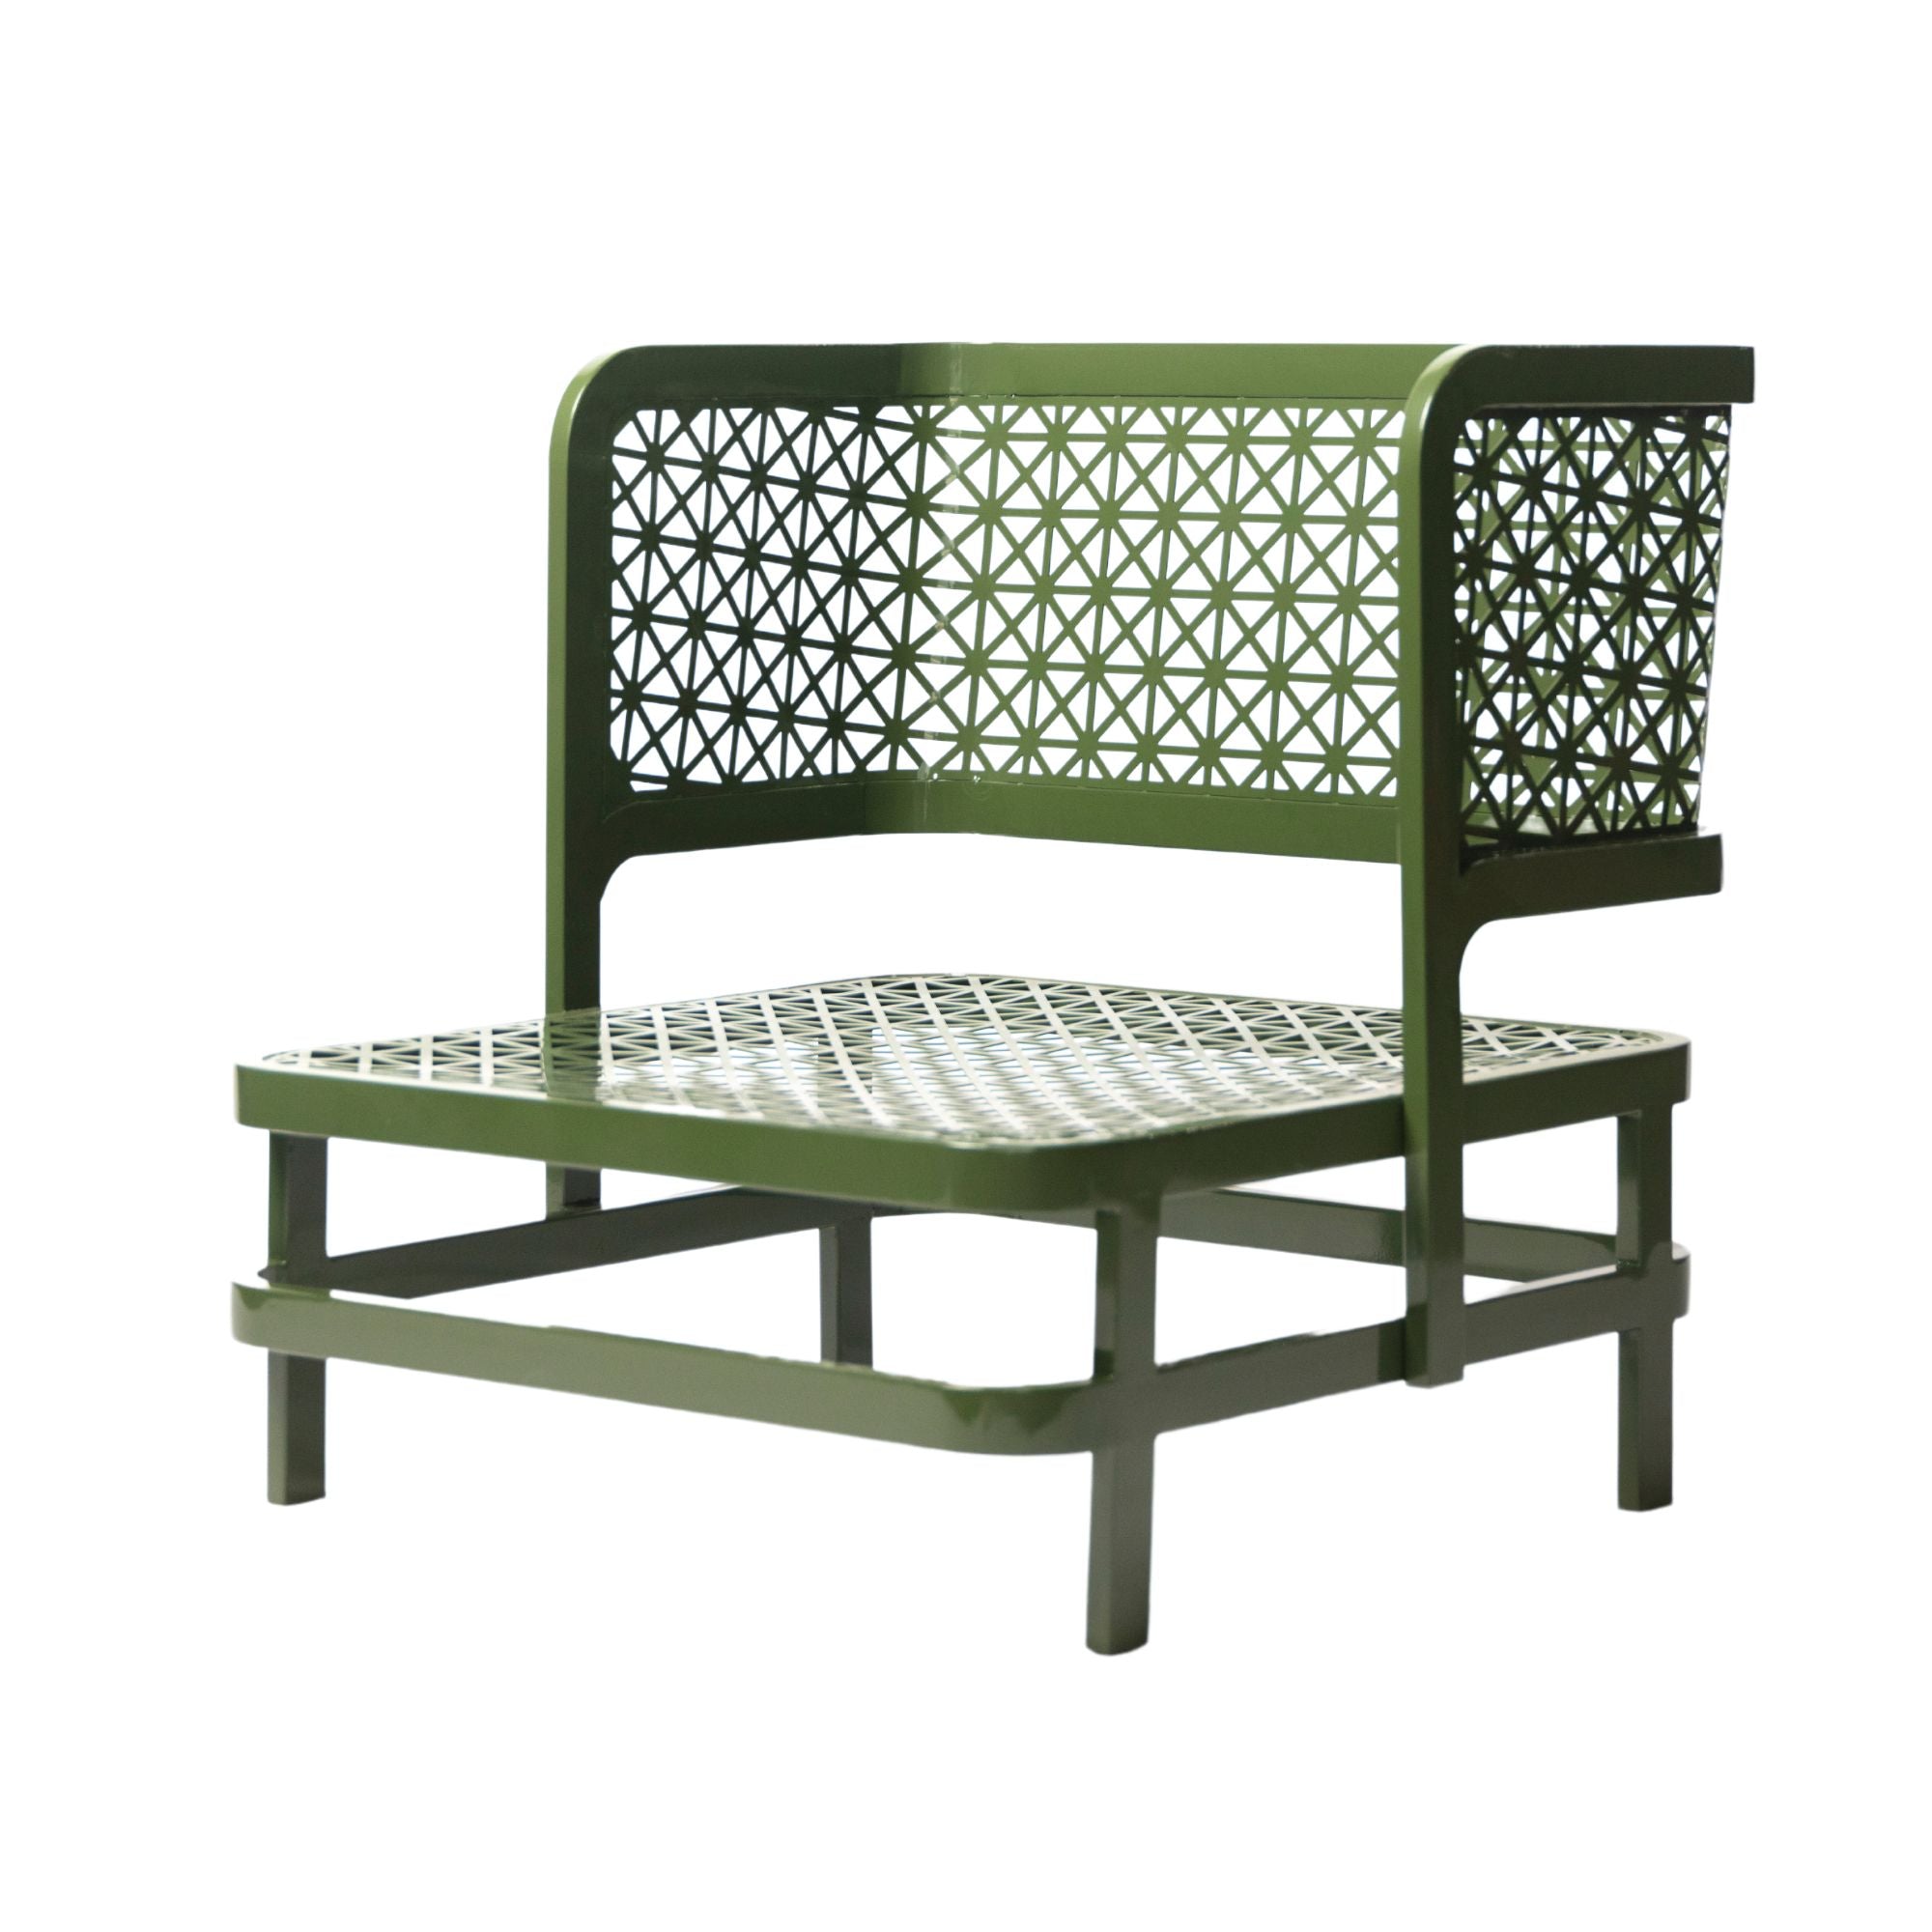 Ananas Chair - Olive